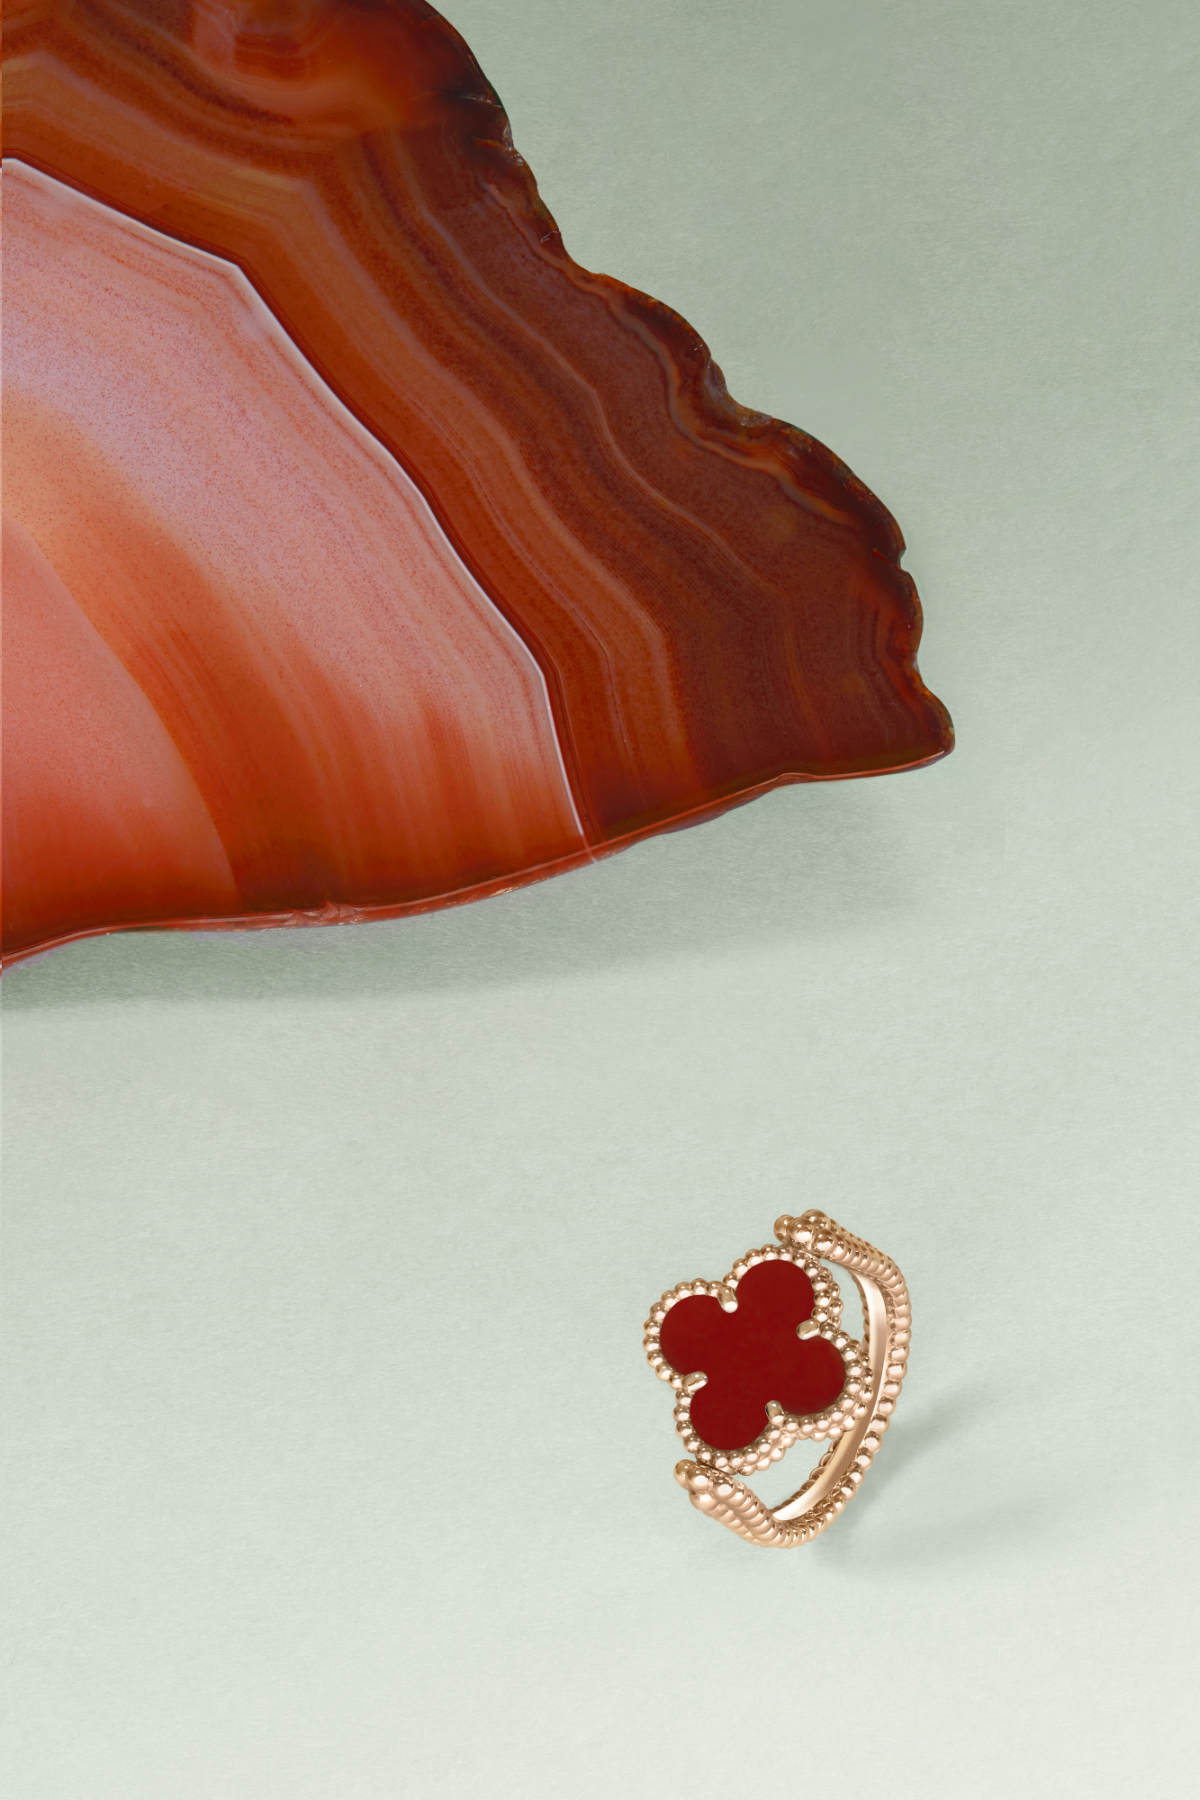 Letter from China: Van Cleef & Arpels, Timeless Beauty Opens in